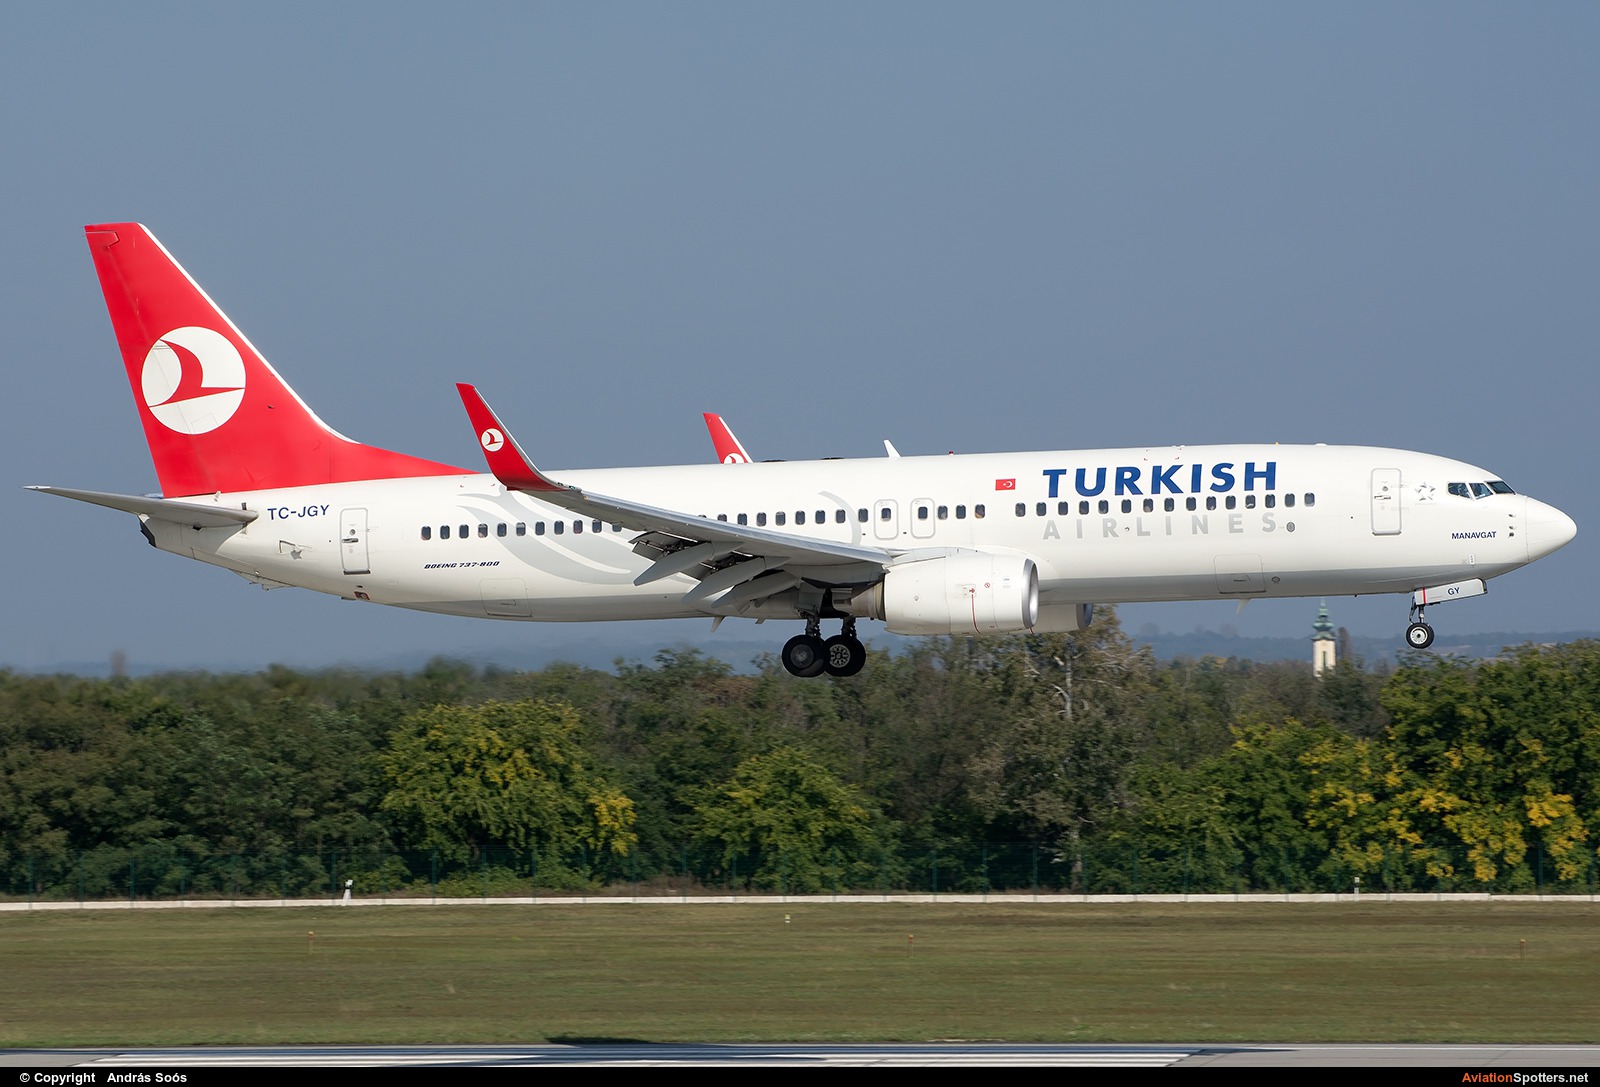 Turkish Airlines  -  737-800  (TC-JGY) By András Soós (sas1965)